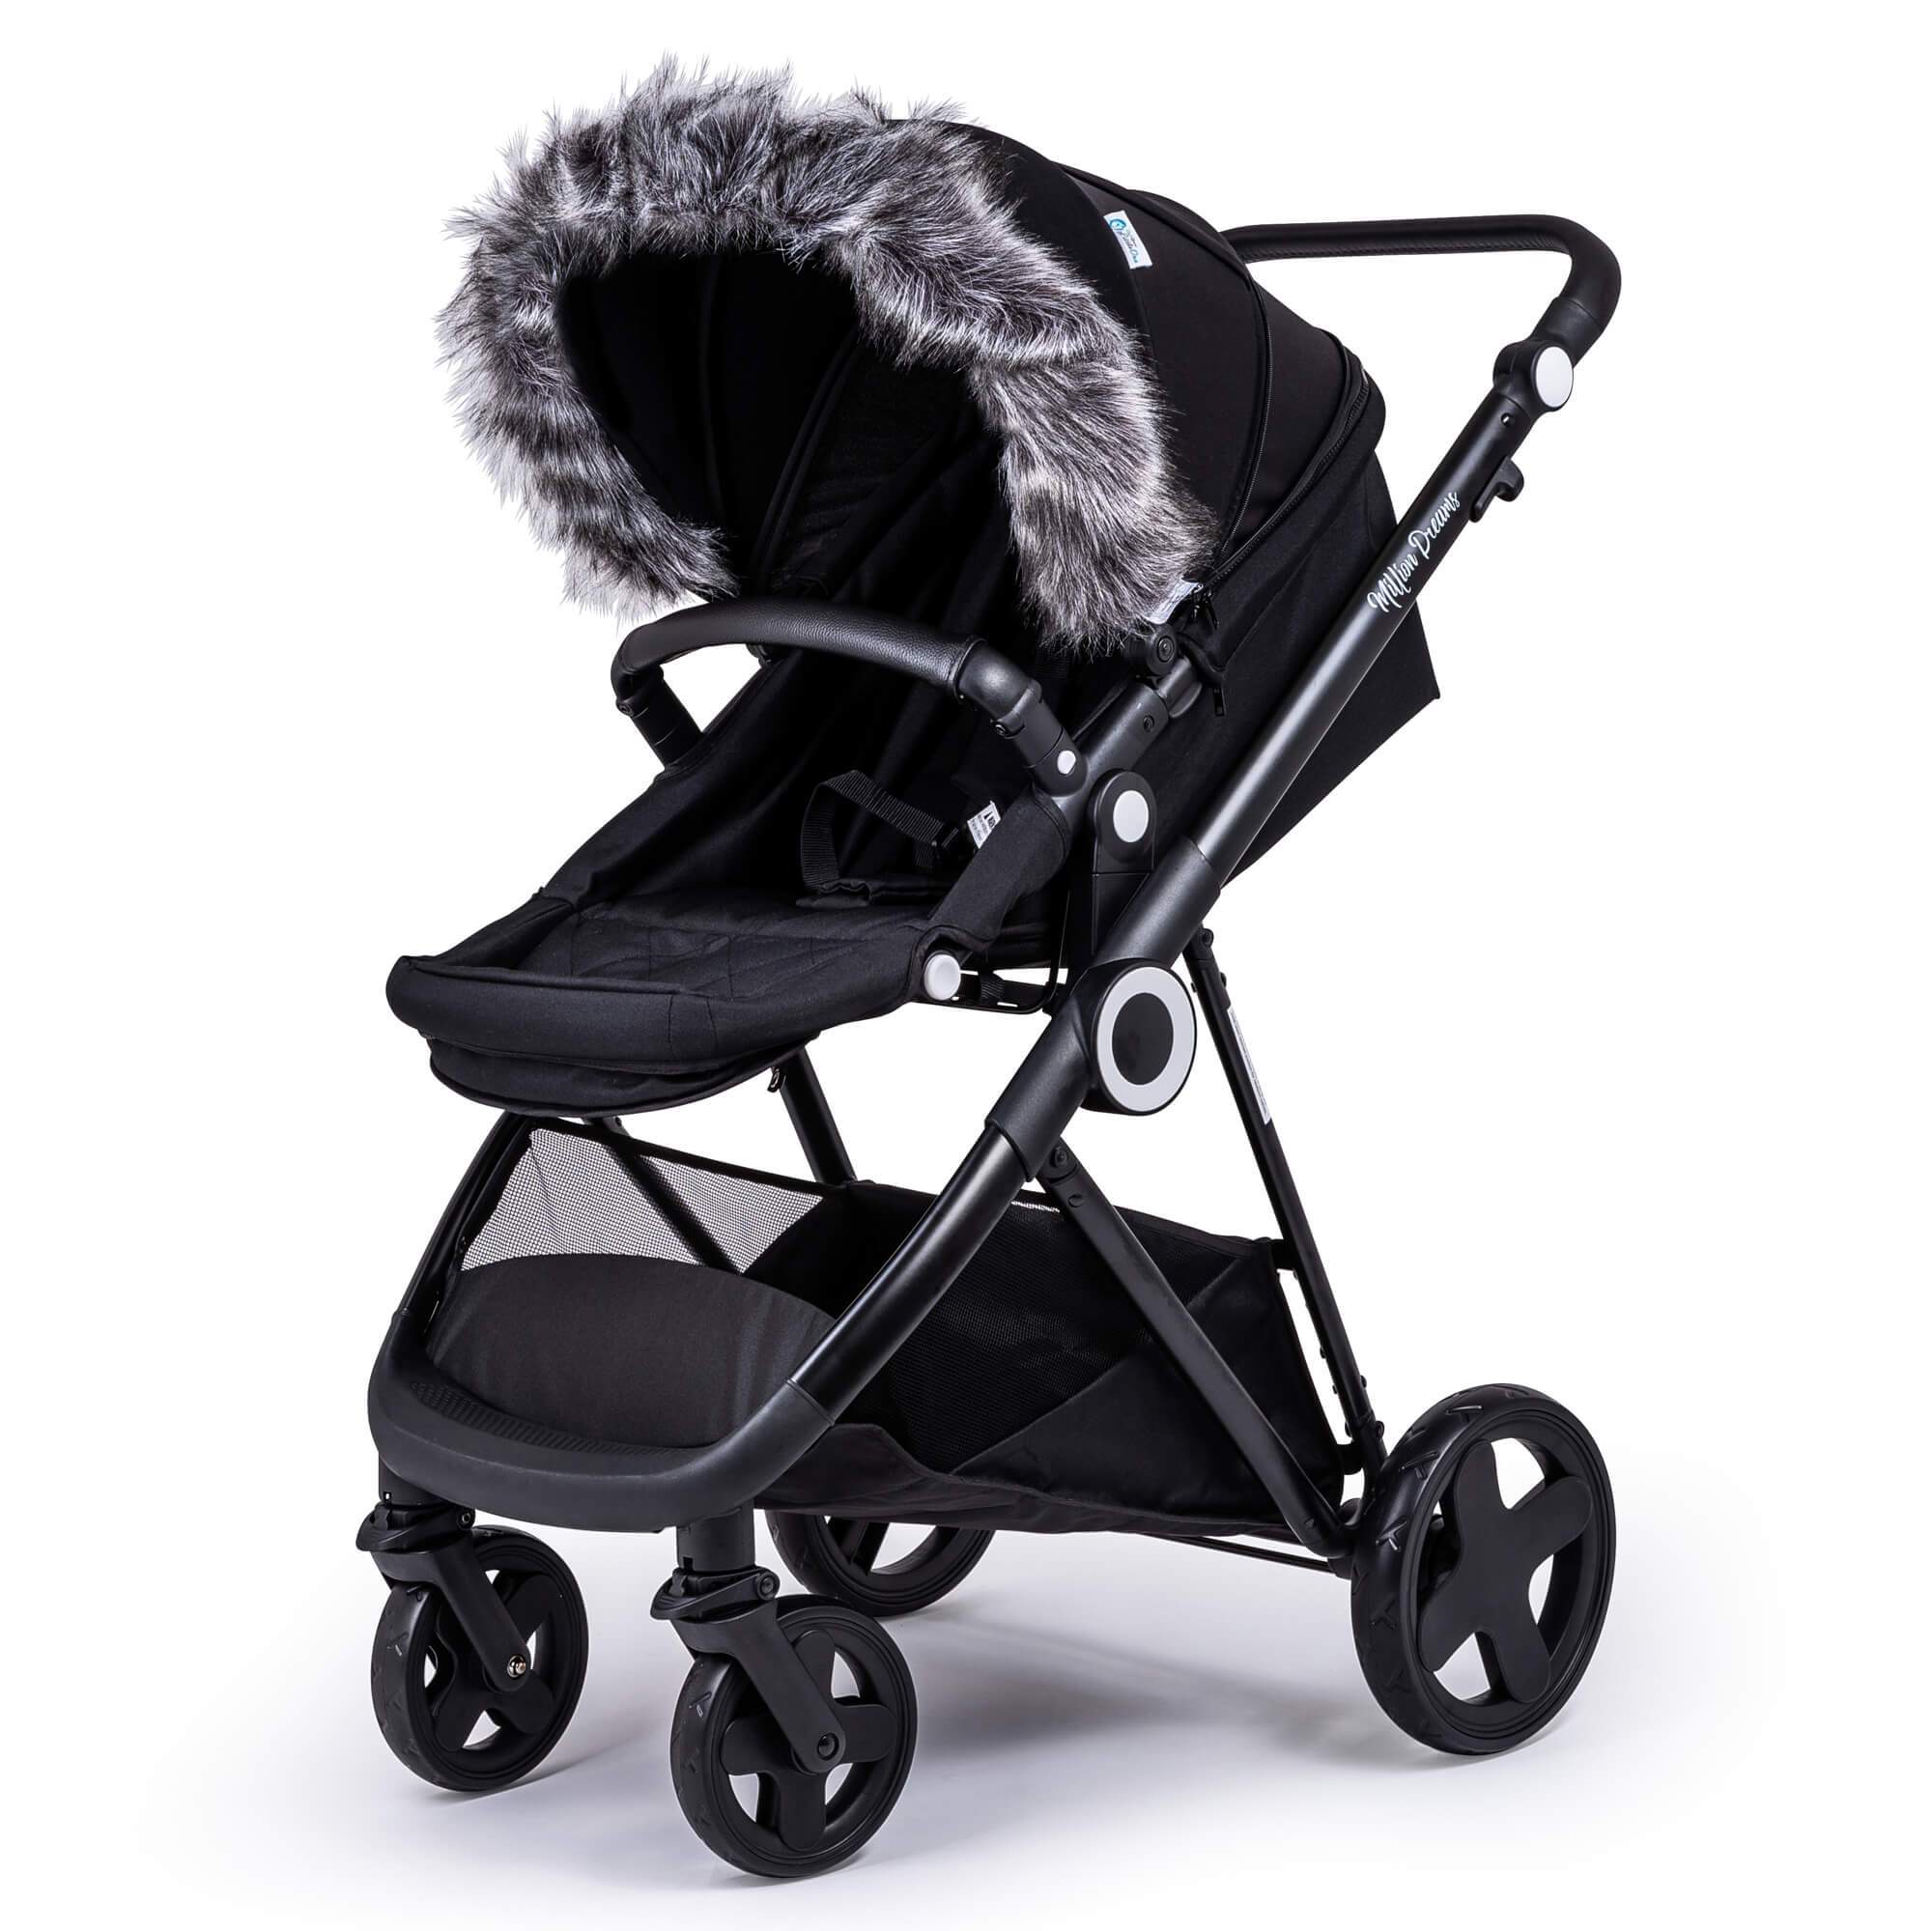 Pram Fur Hood Trim Attachment for Pushchair Compatible with Babylo - Dark Grey / Fits All Models | For Your Little One